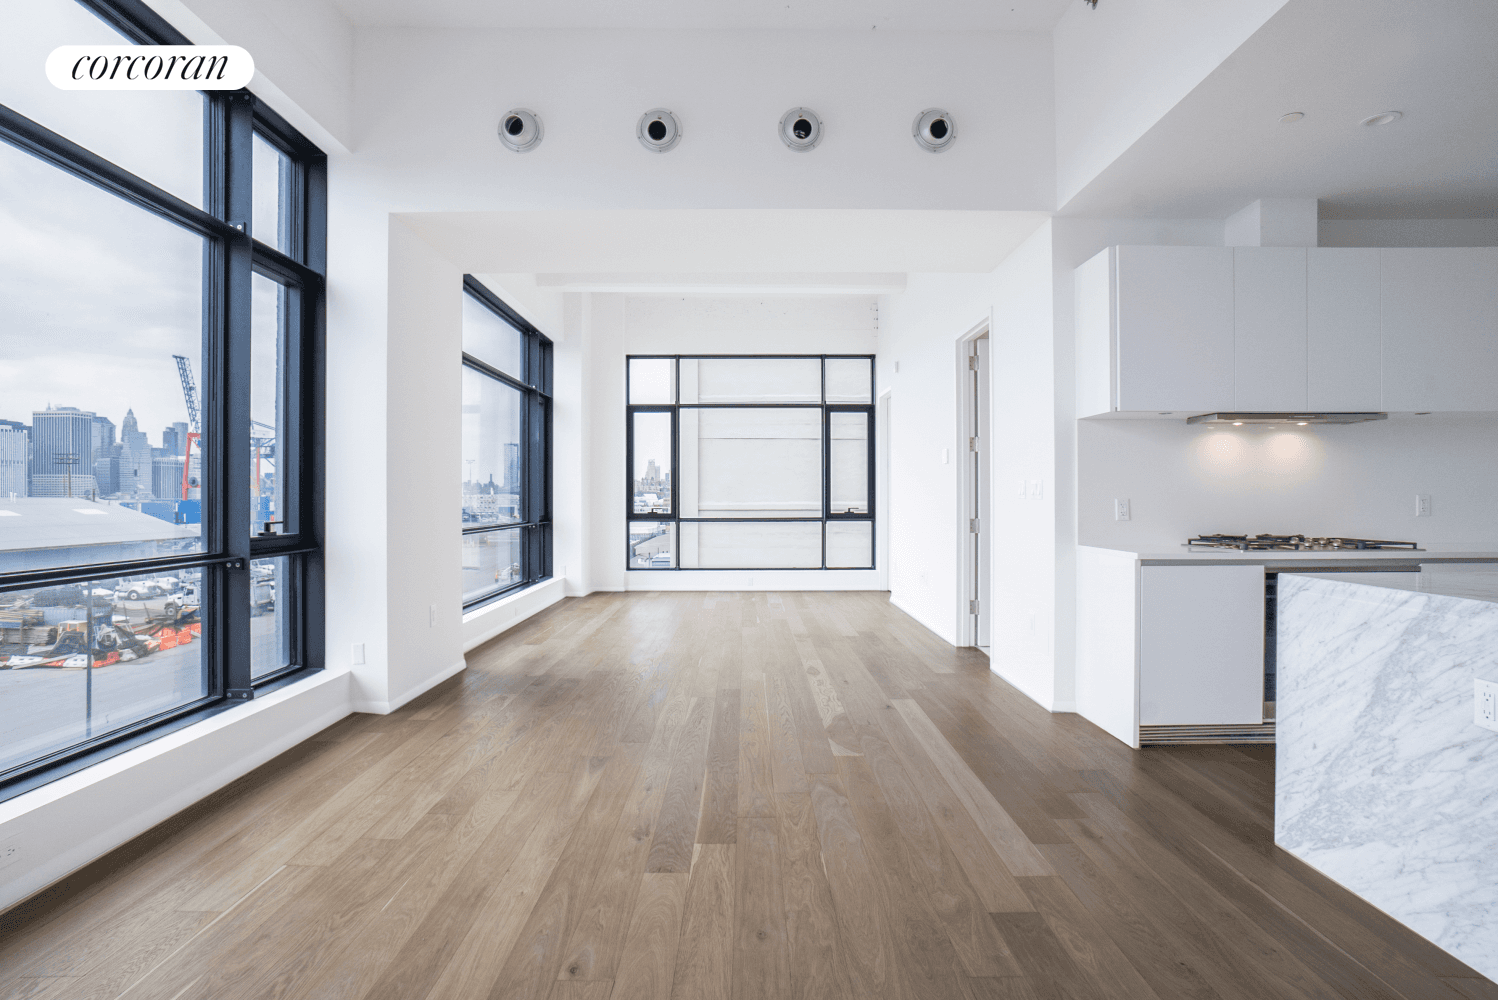 Welcome to 160 Imlay, The New York Dock Building, long awaited Warehouse Loft Conversion in Red Hook is ready to be called home.